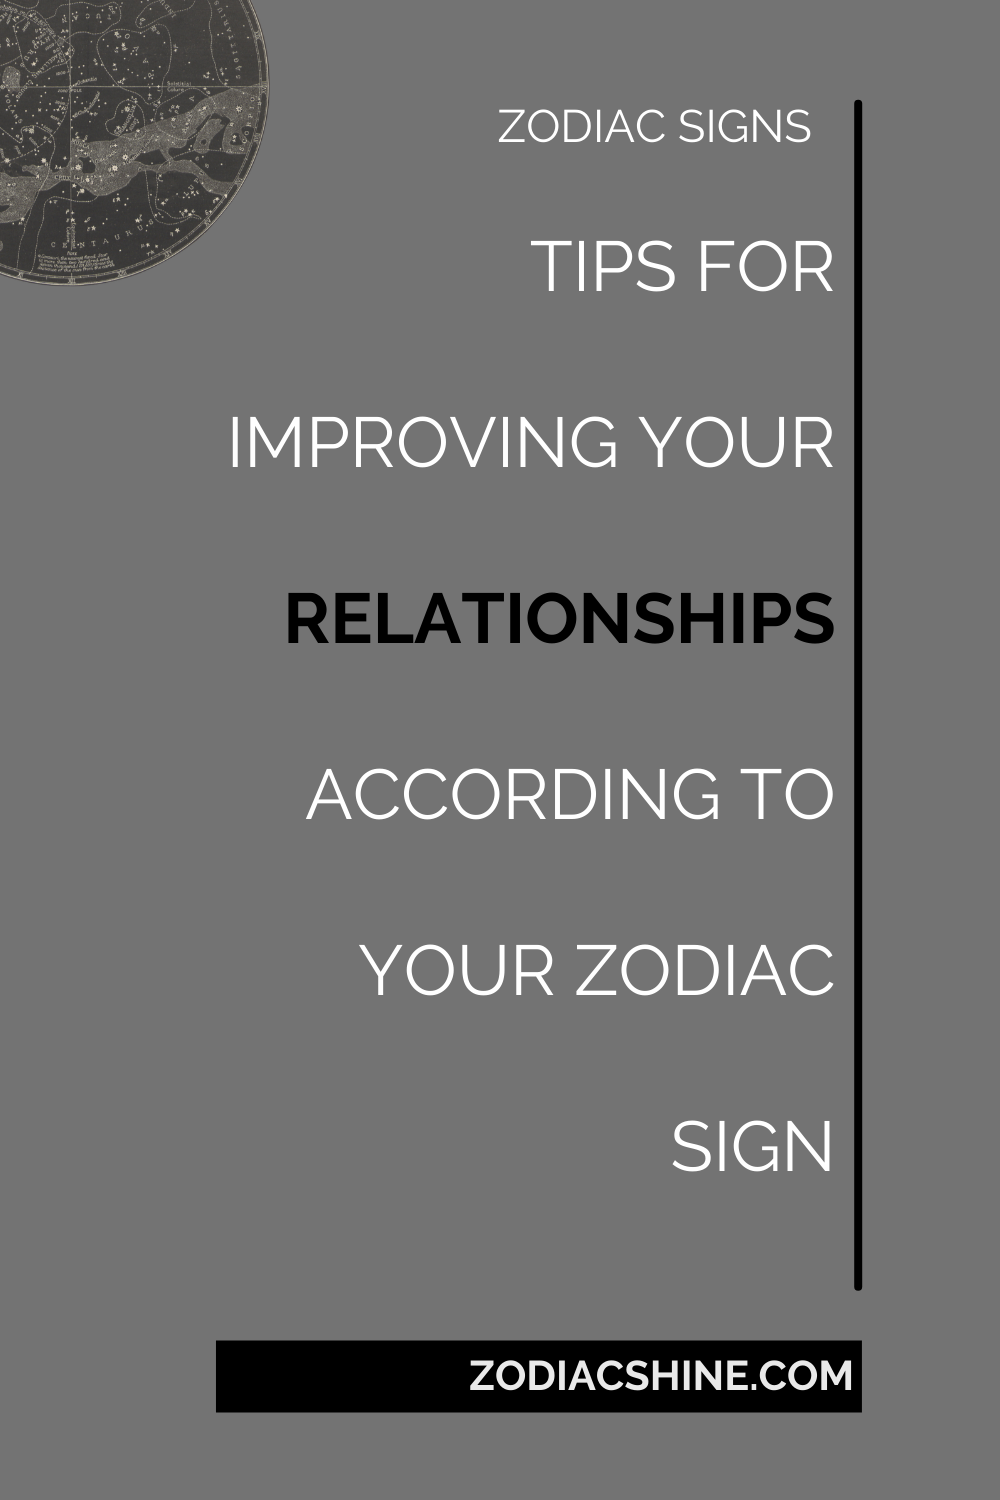 TIPS FOR IMPROVING YOUR RELATIONSHIPS ACCORDING TO YOUR ZODIAC SIGN